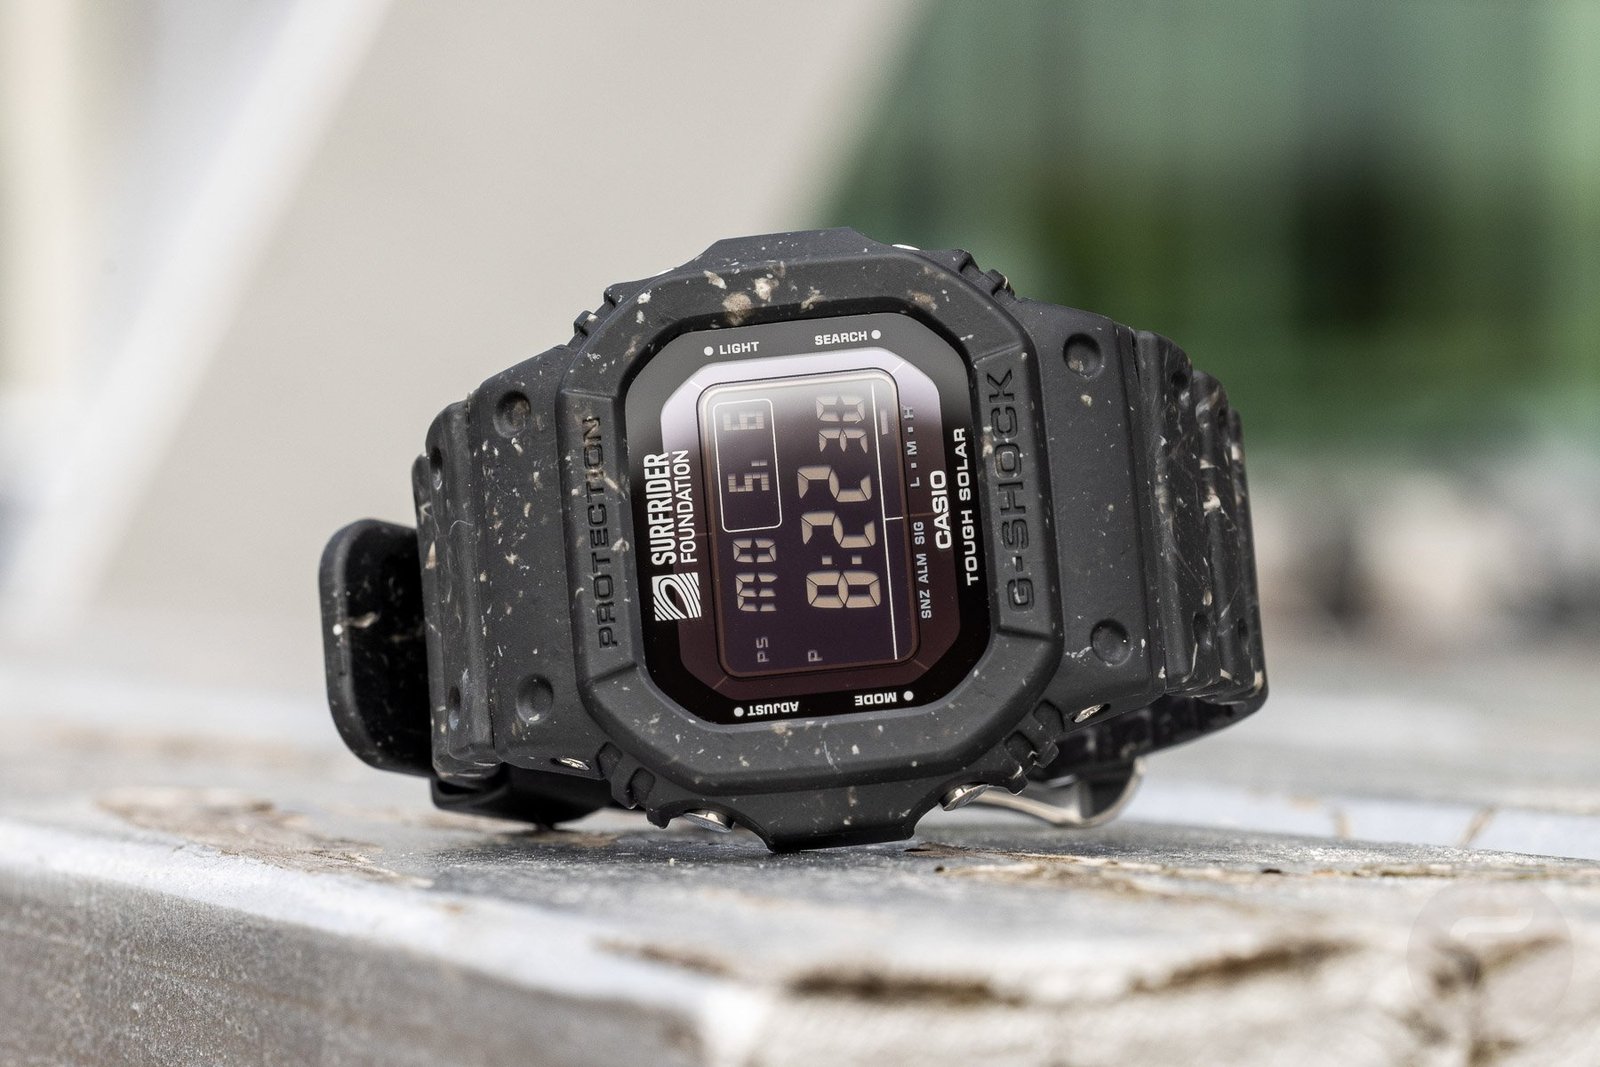 Hands-On With The Casio G-Shock G-5600SRF-1 — A Thought-Provoking Watch With A Unique Case And Strap